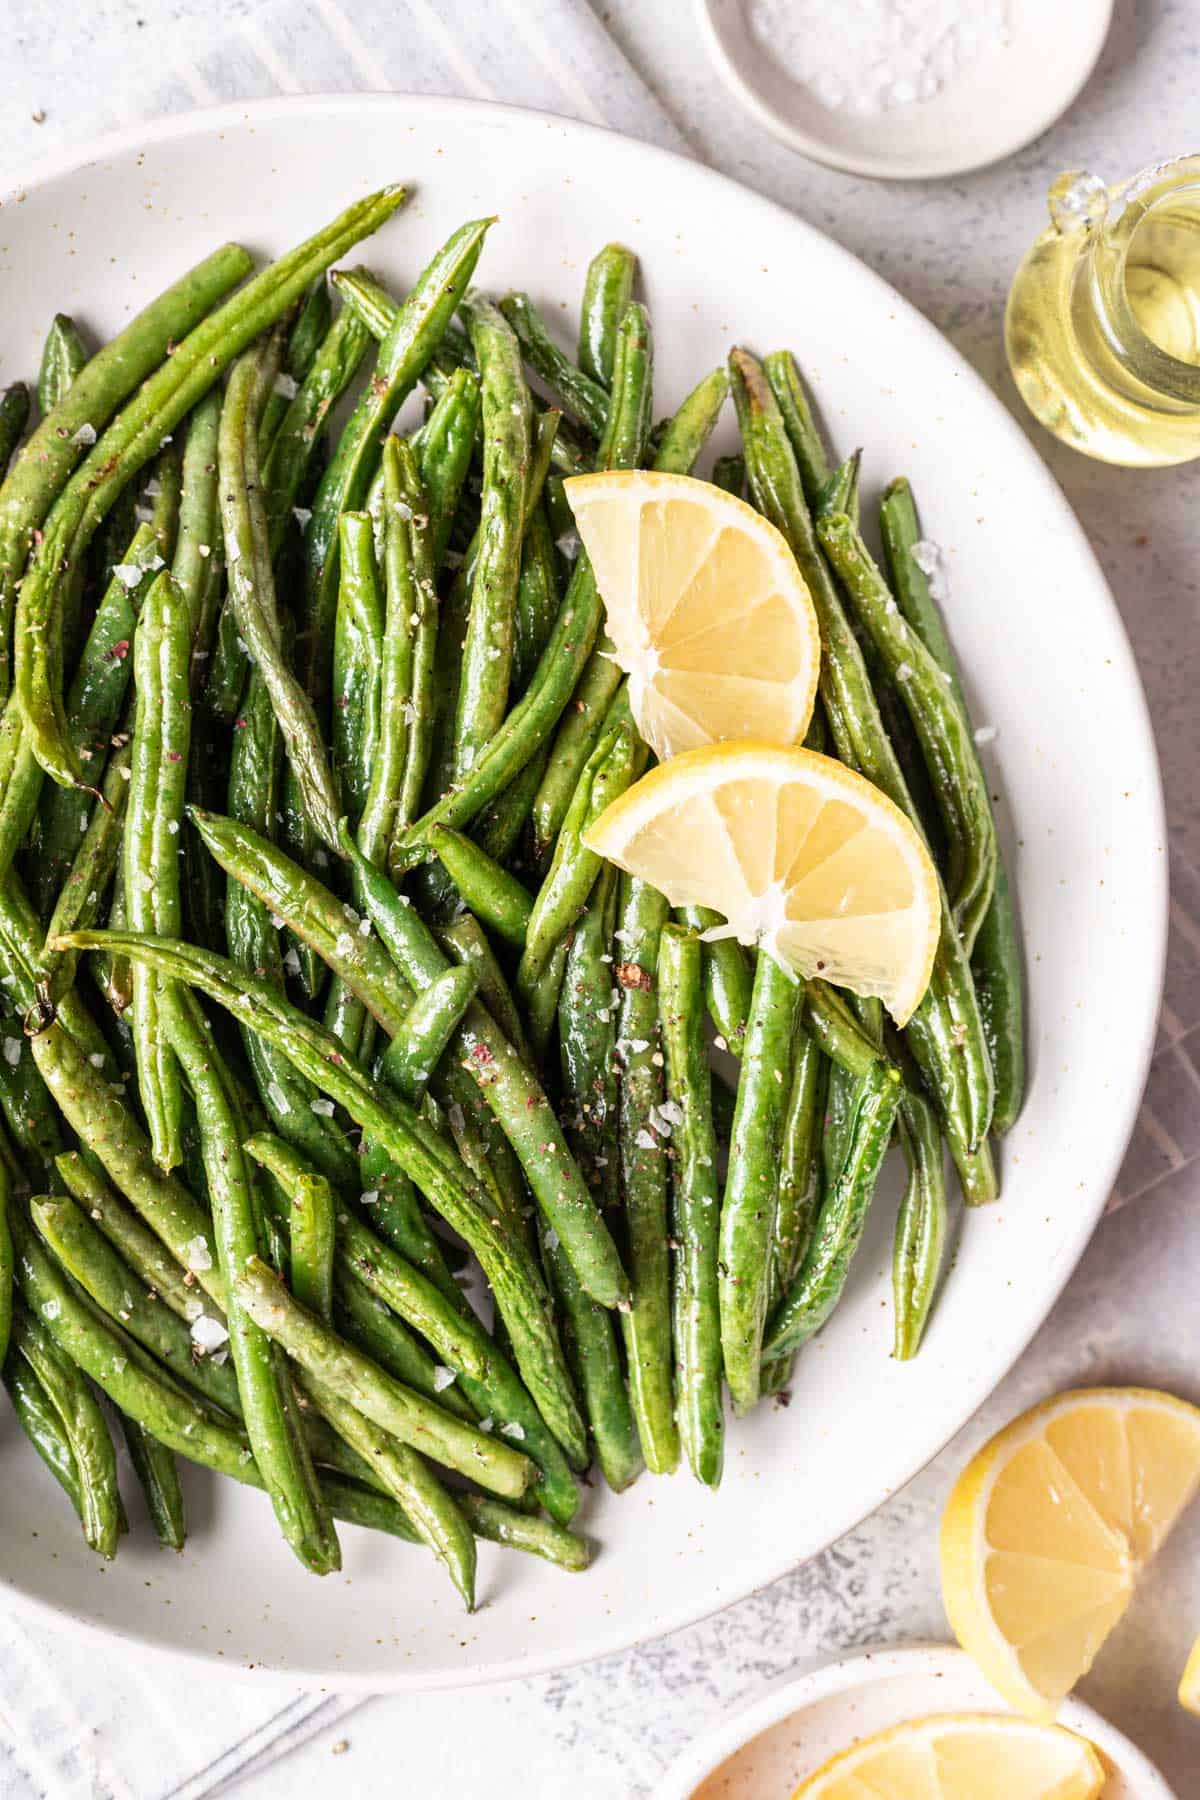 A plate of air fryer green beans garnished with fresh lemon wedges.